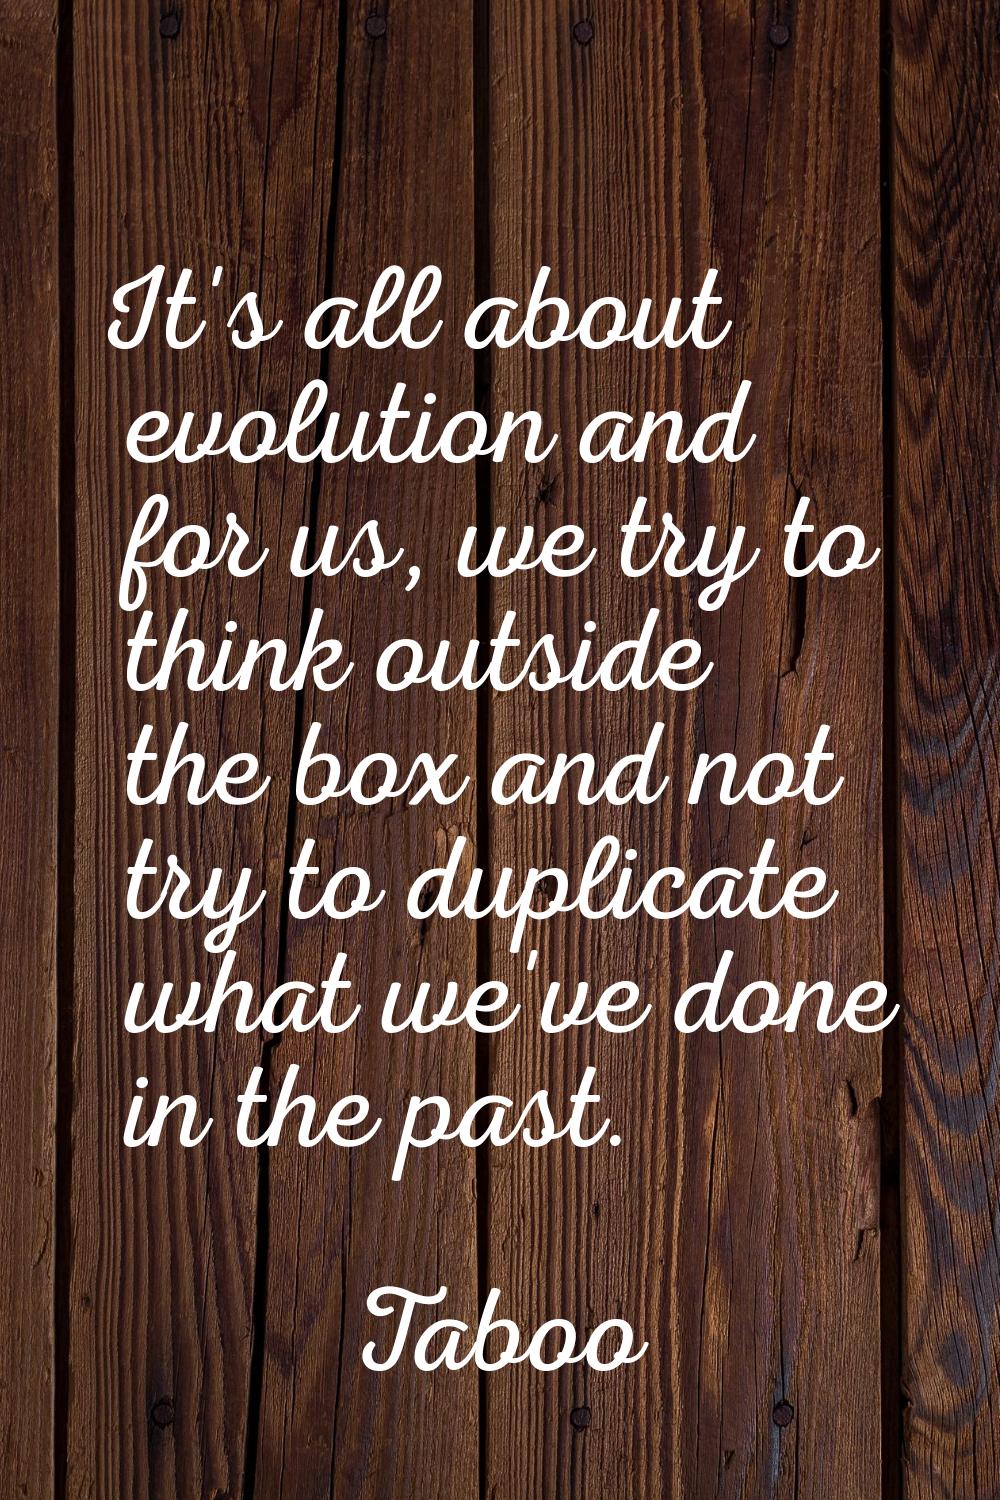 It's all about evolution and for us, we try to think outside the box and not try to duplicate what 